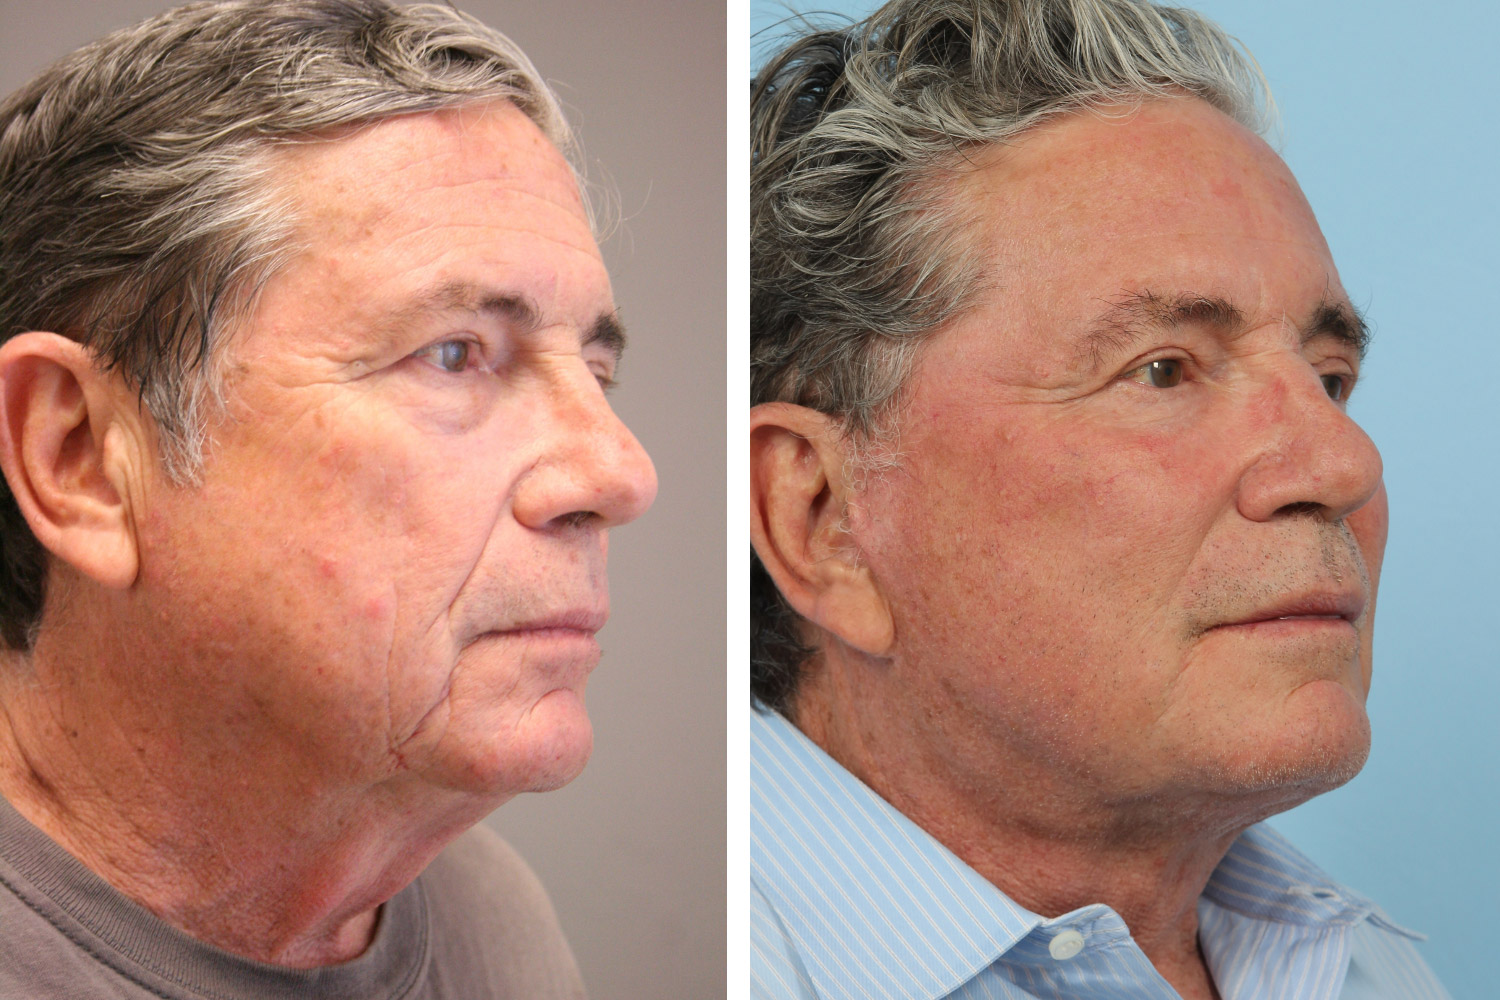 Lower face lift and neck lift with fat injections lower blepharoplasty, and laser resurfacing on a 60-year-old man